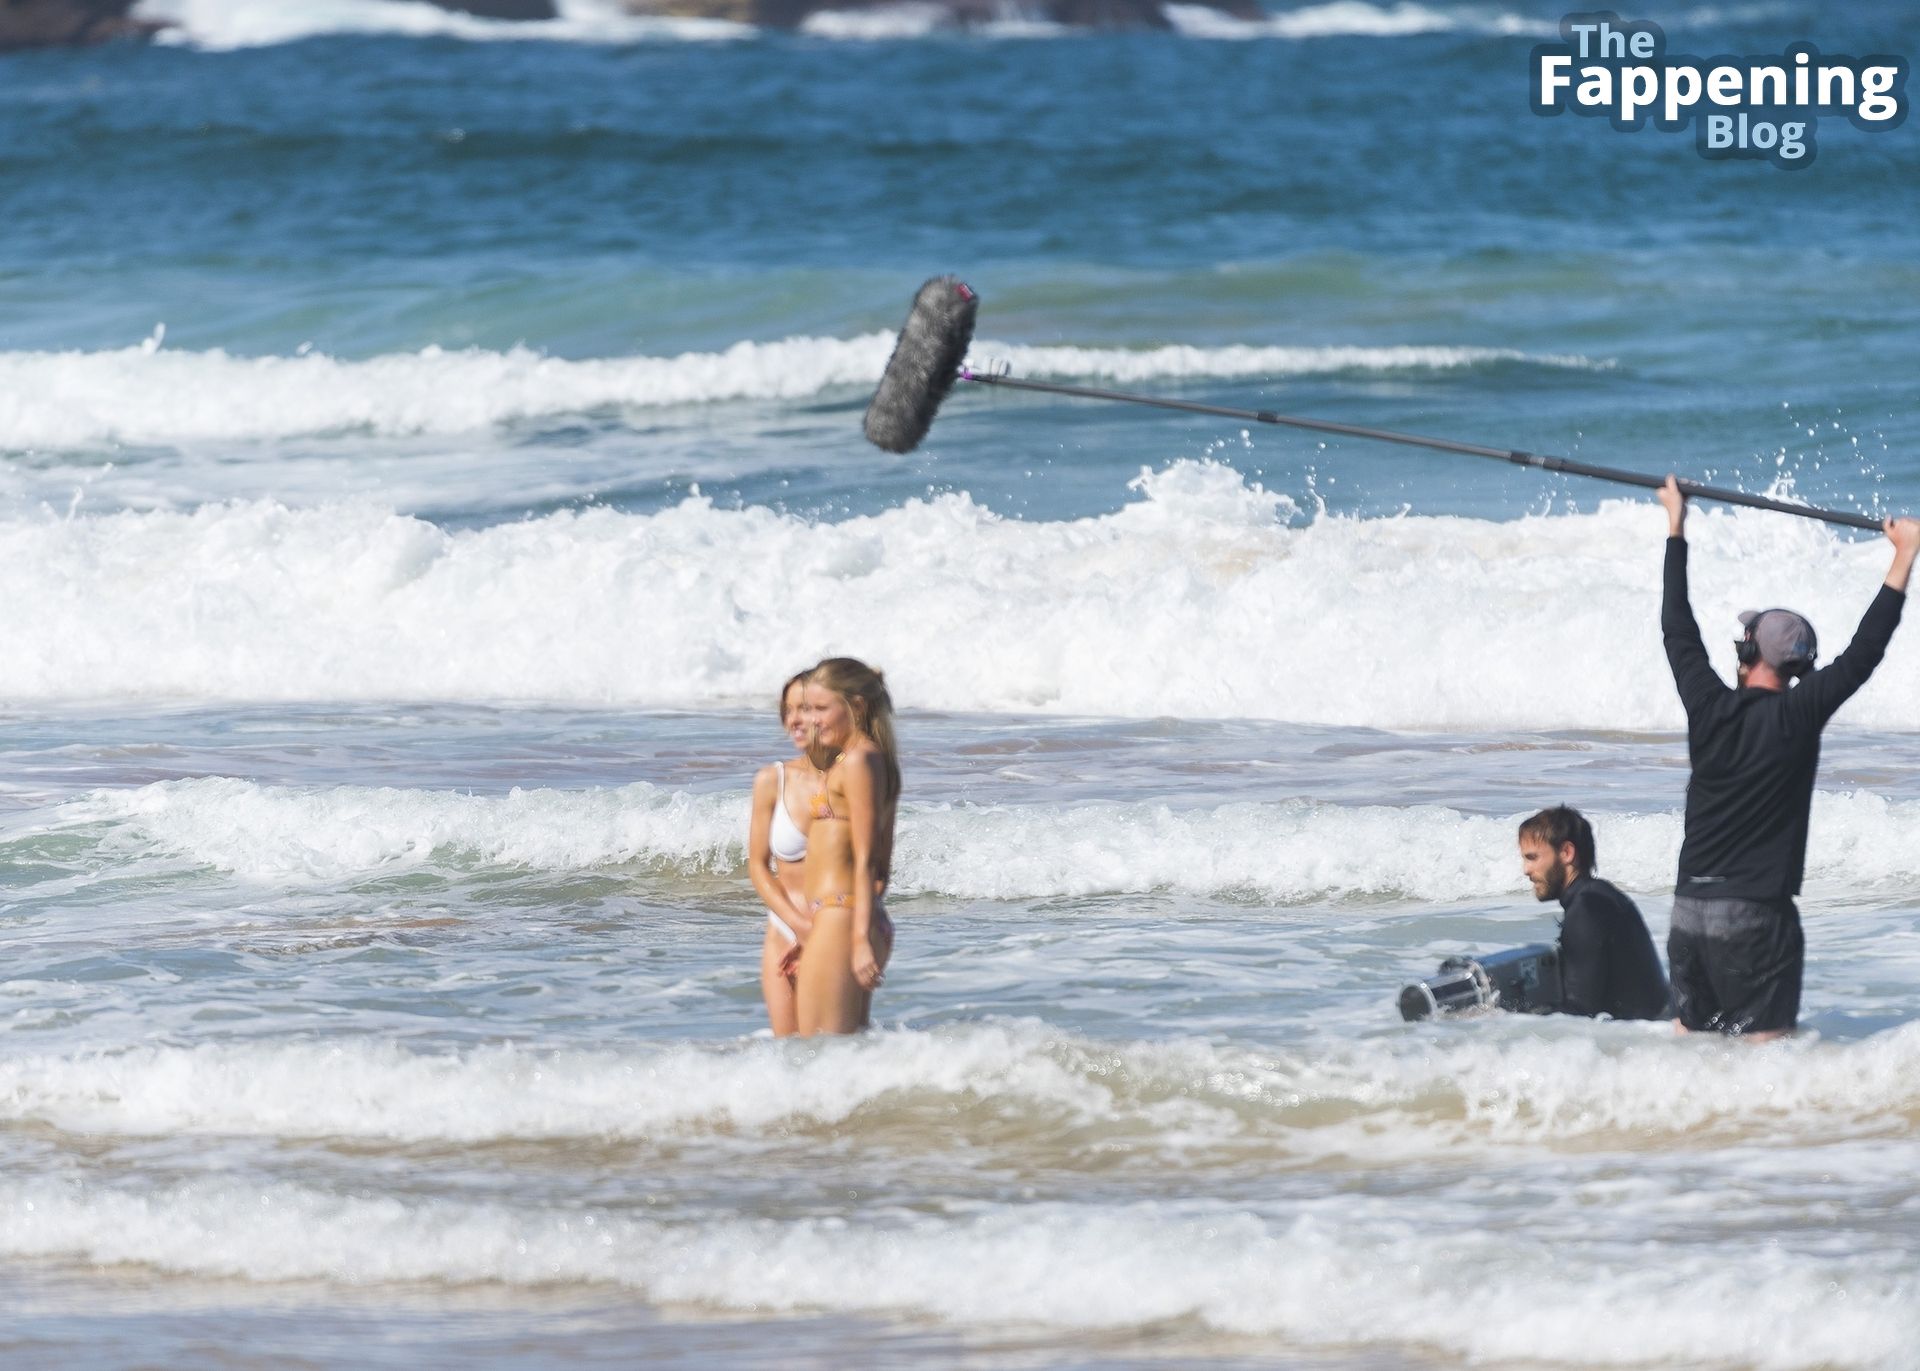 Sydney Sweeney, Glen Powell and Cast Heat Up the Screen with Steamy Beach Scenes for a New Film in Australia (127 Photos)